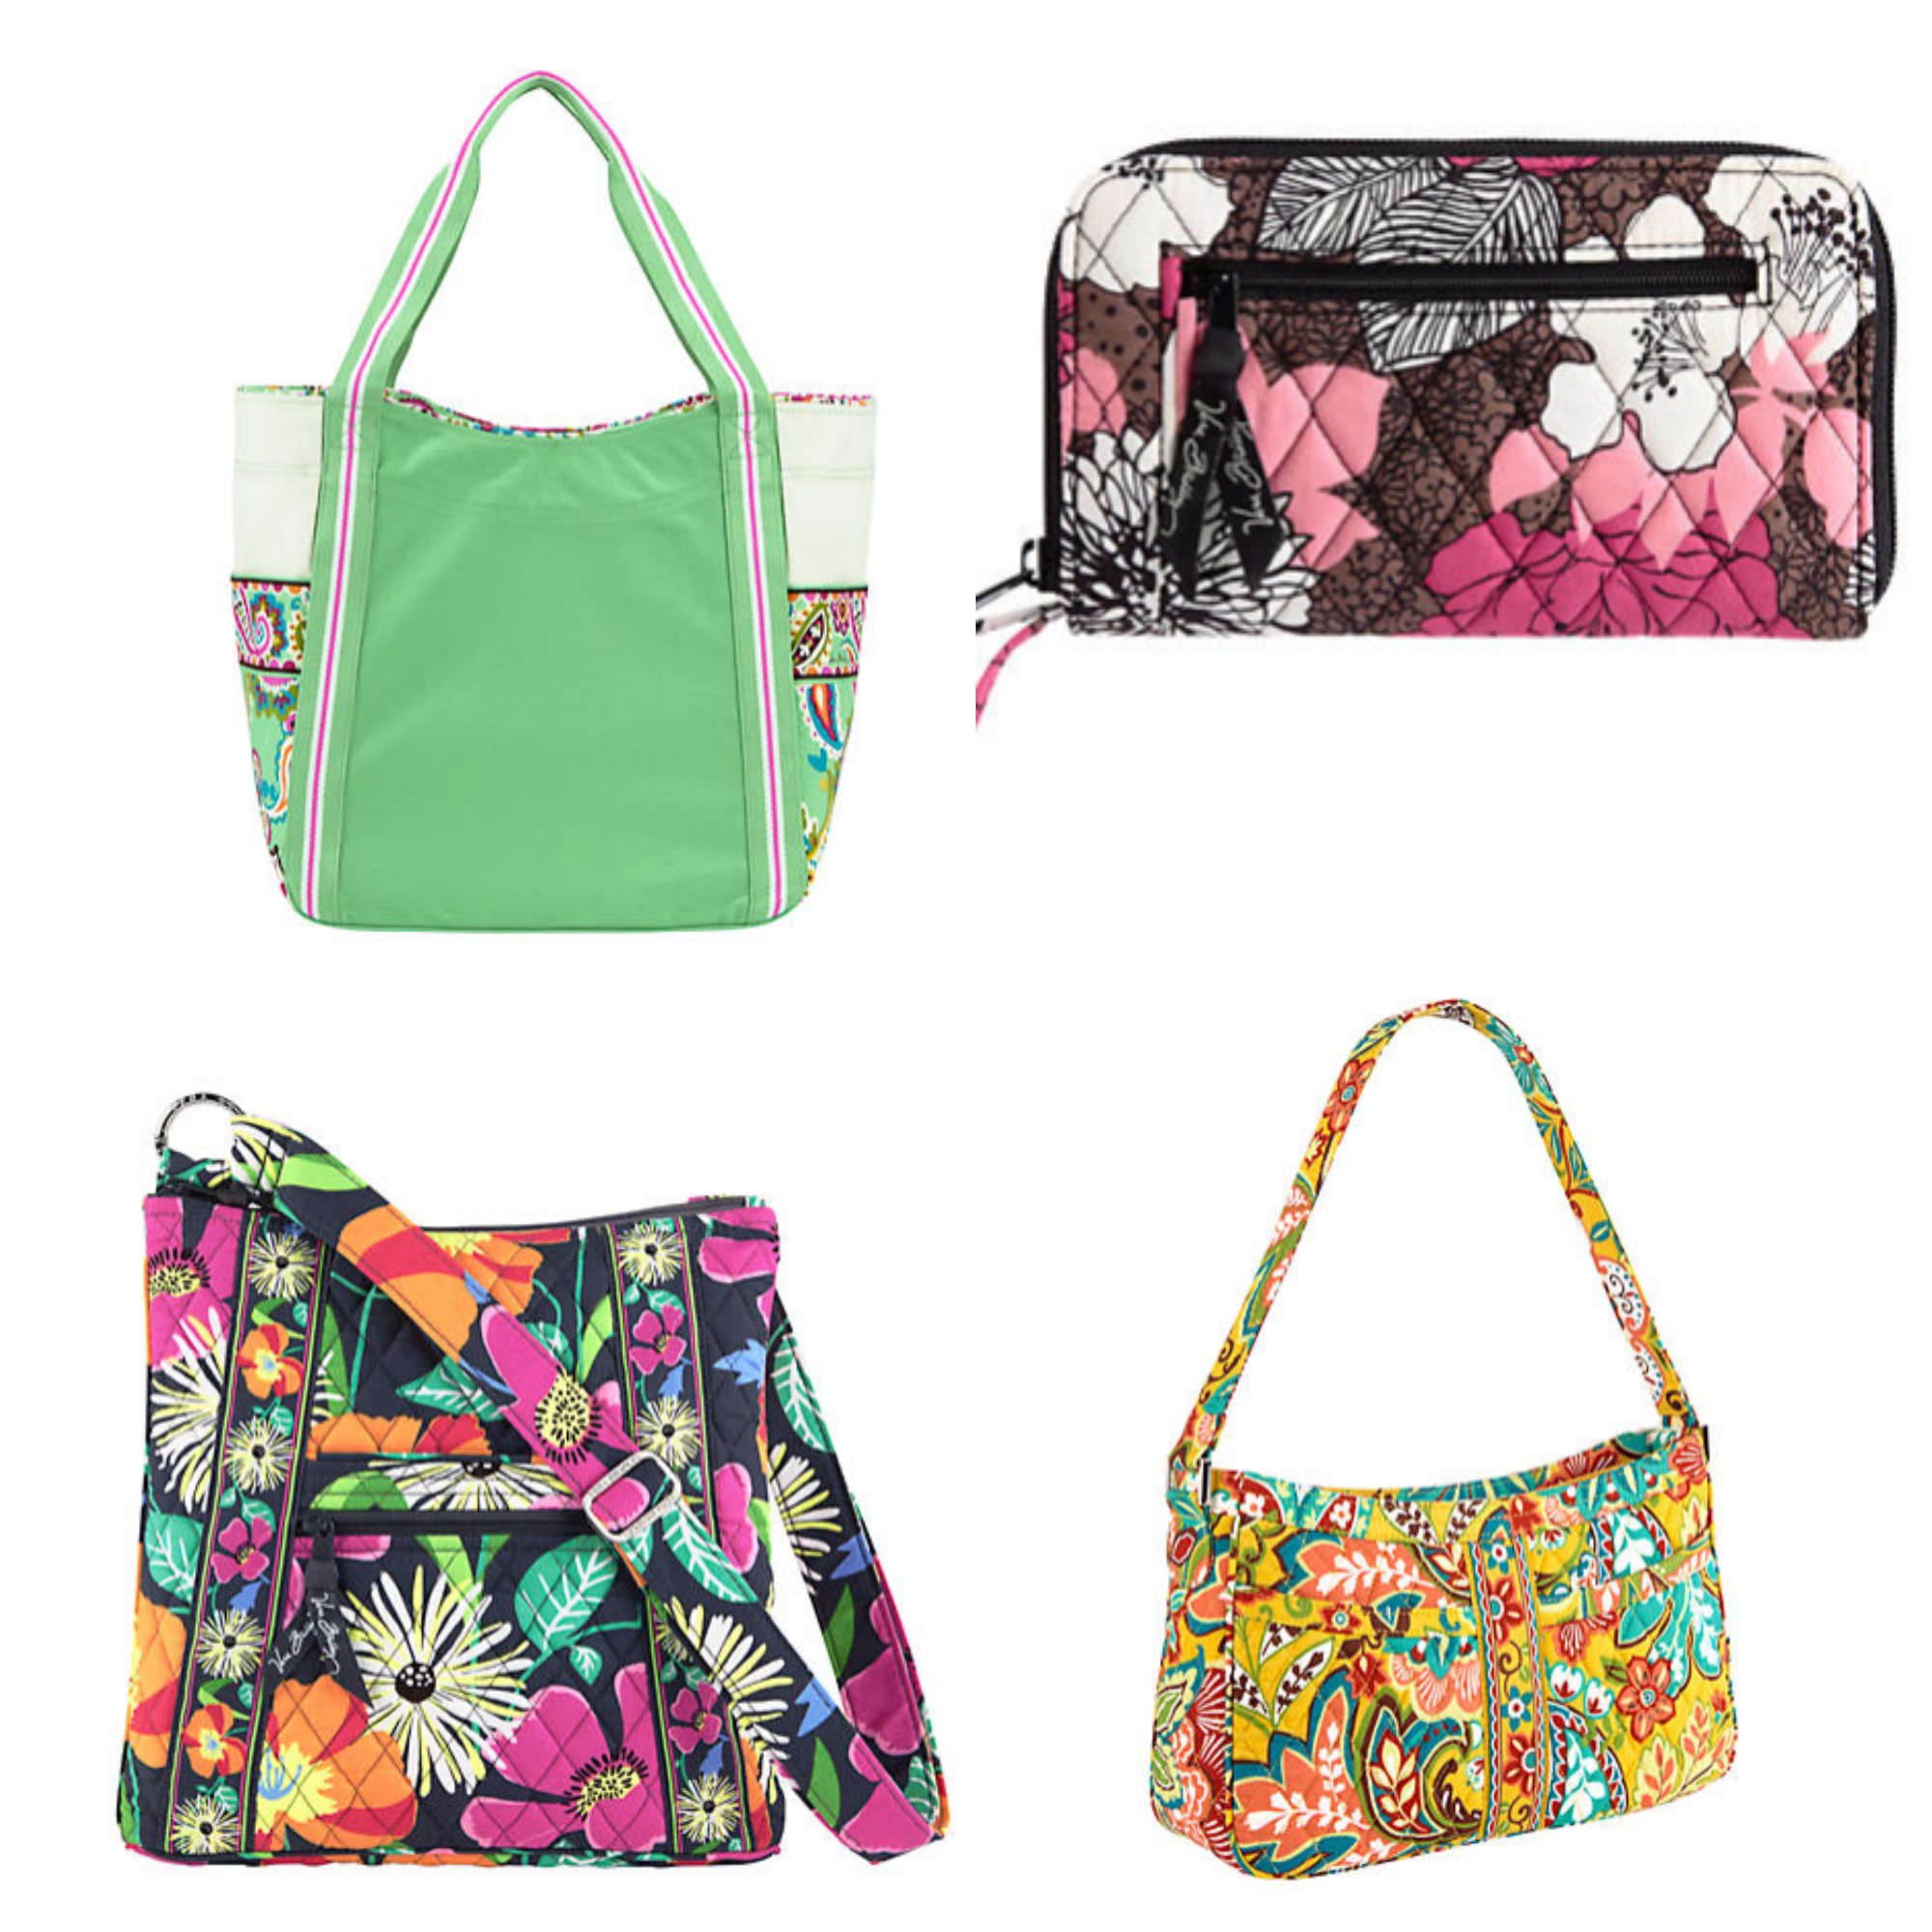 Vera Bradley: Up To 75% Off Outlet Items - My Frugal Adventures